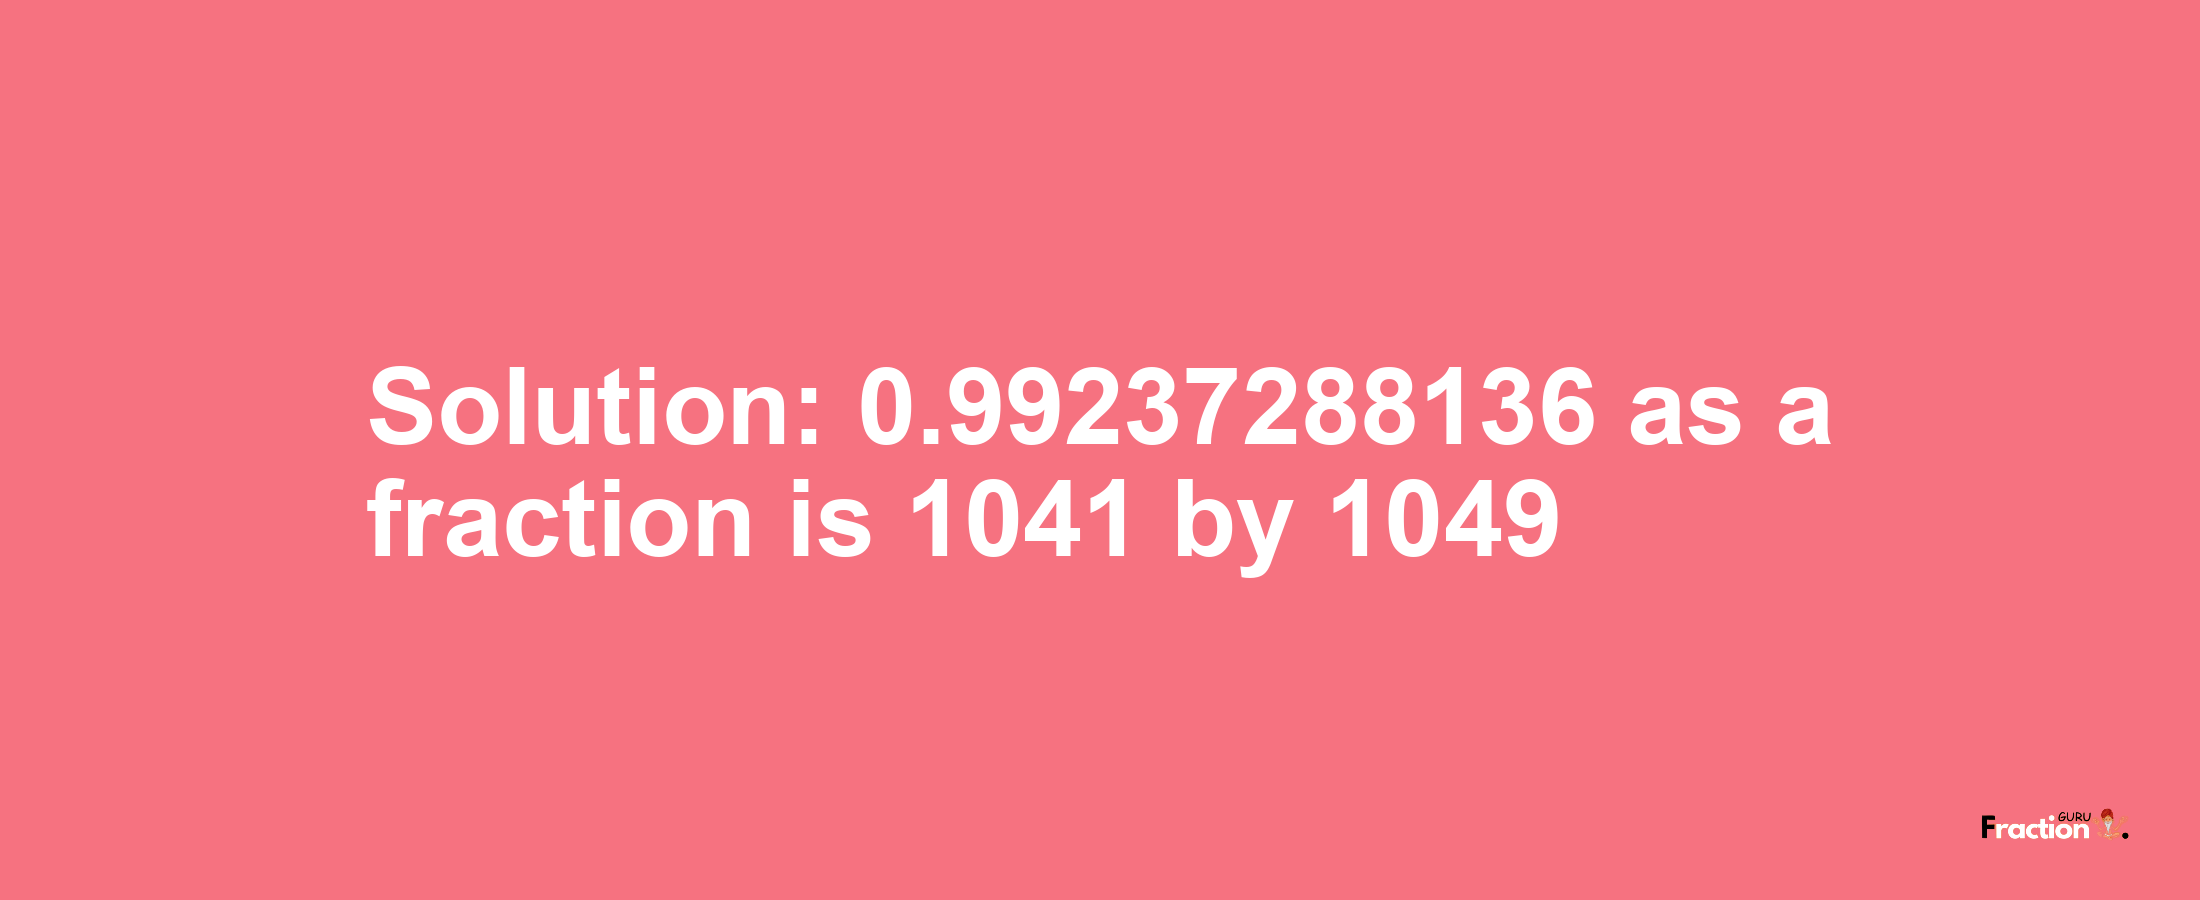 Solution:0.99237288136 as a fraction is 1041/1049